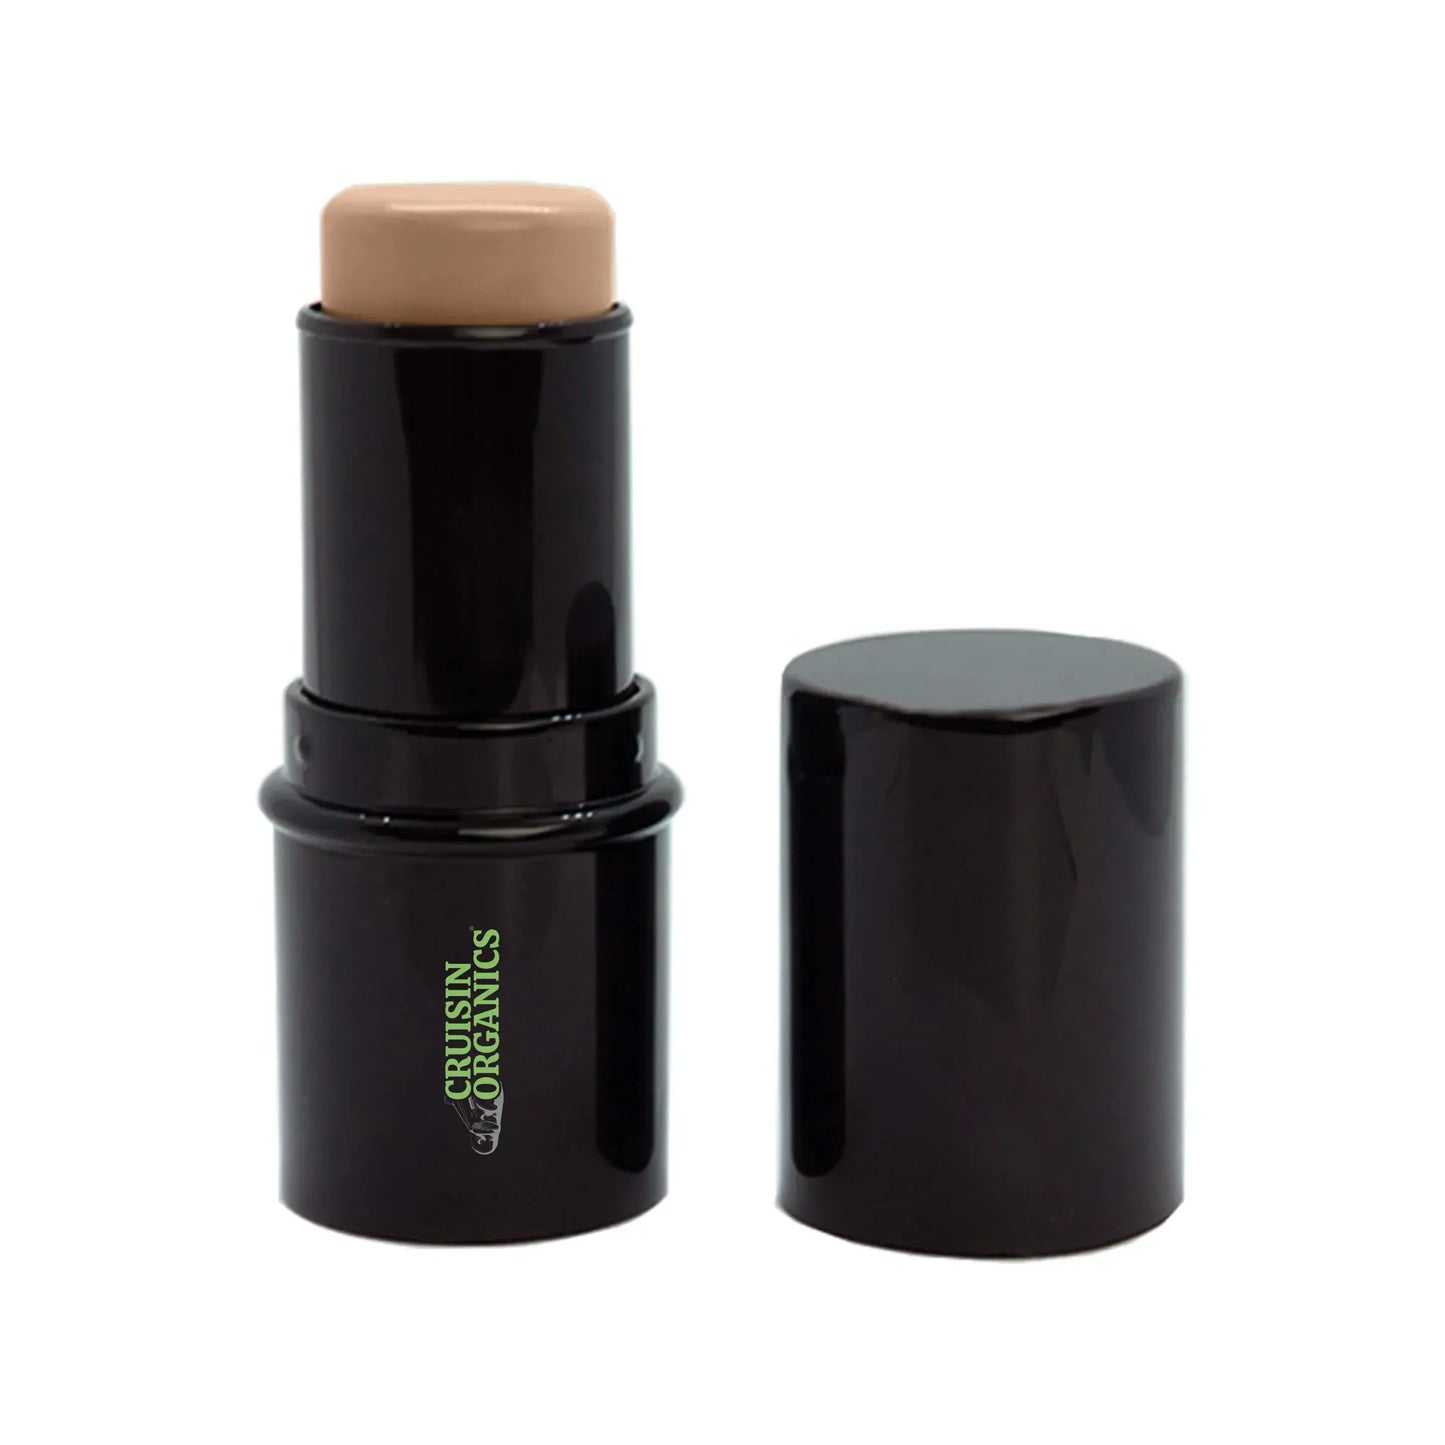 Correct imperfections with this easy-to-use, compact Cruisin Organics Concealer Stick. Provides medium to full coverage with a matte finish. You can also use darker shades for contouring and lighter shades for highlighting.